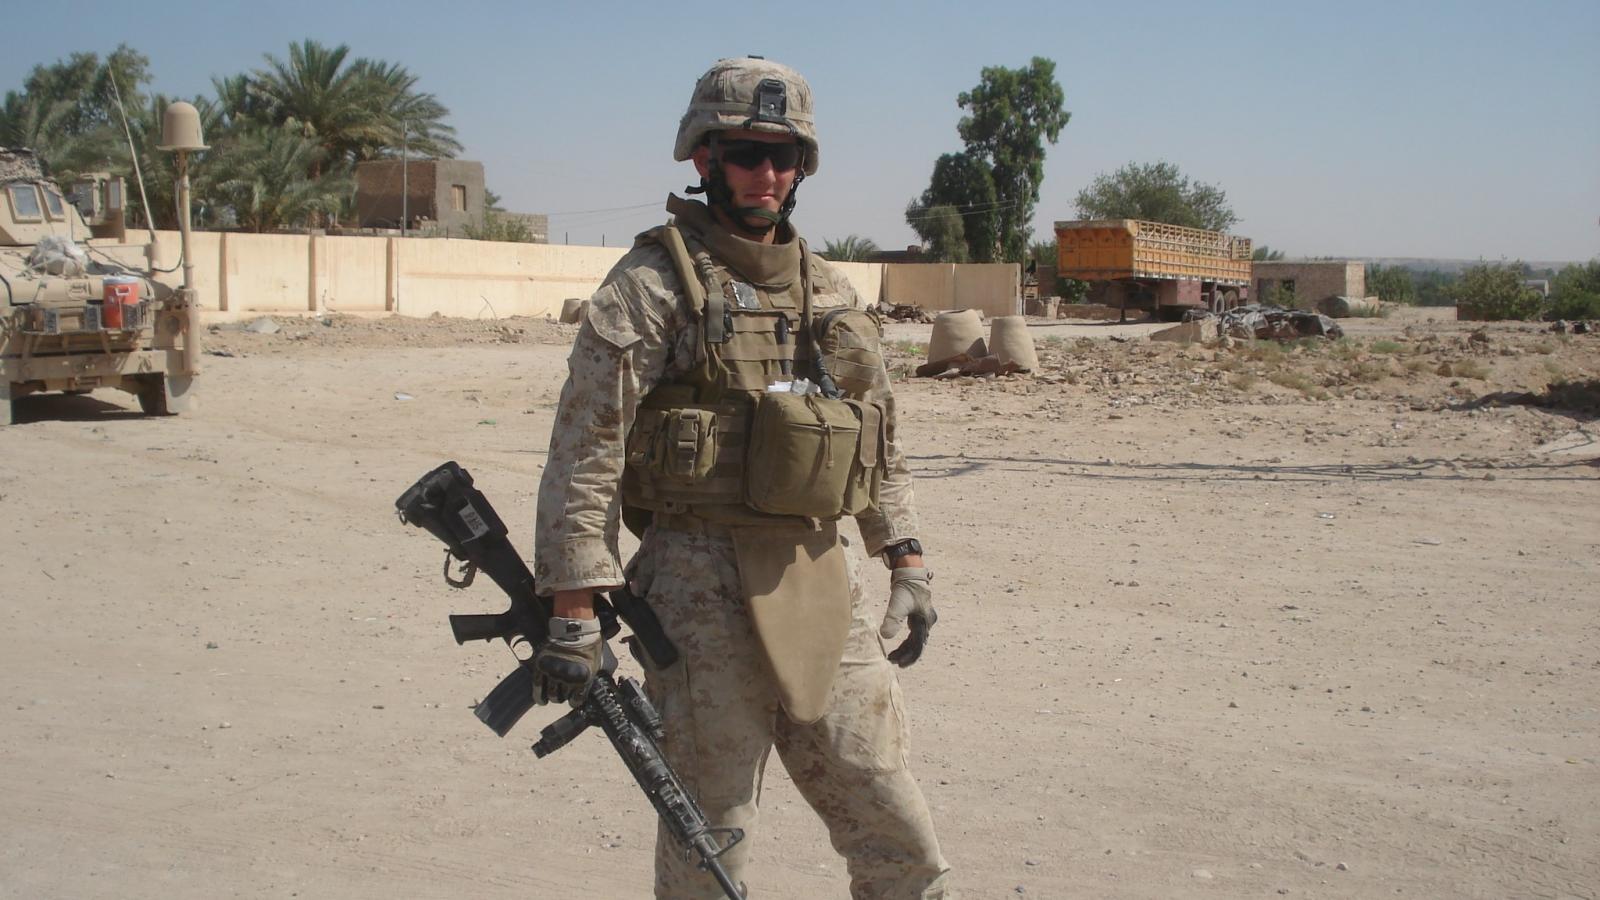 Alex Pais joined the Marines in 2005 and was deployed to the Middle East twice. Photo courtesy of Alex Pais